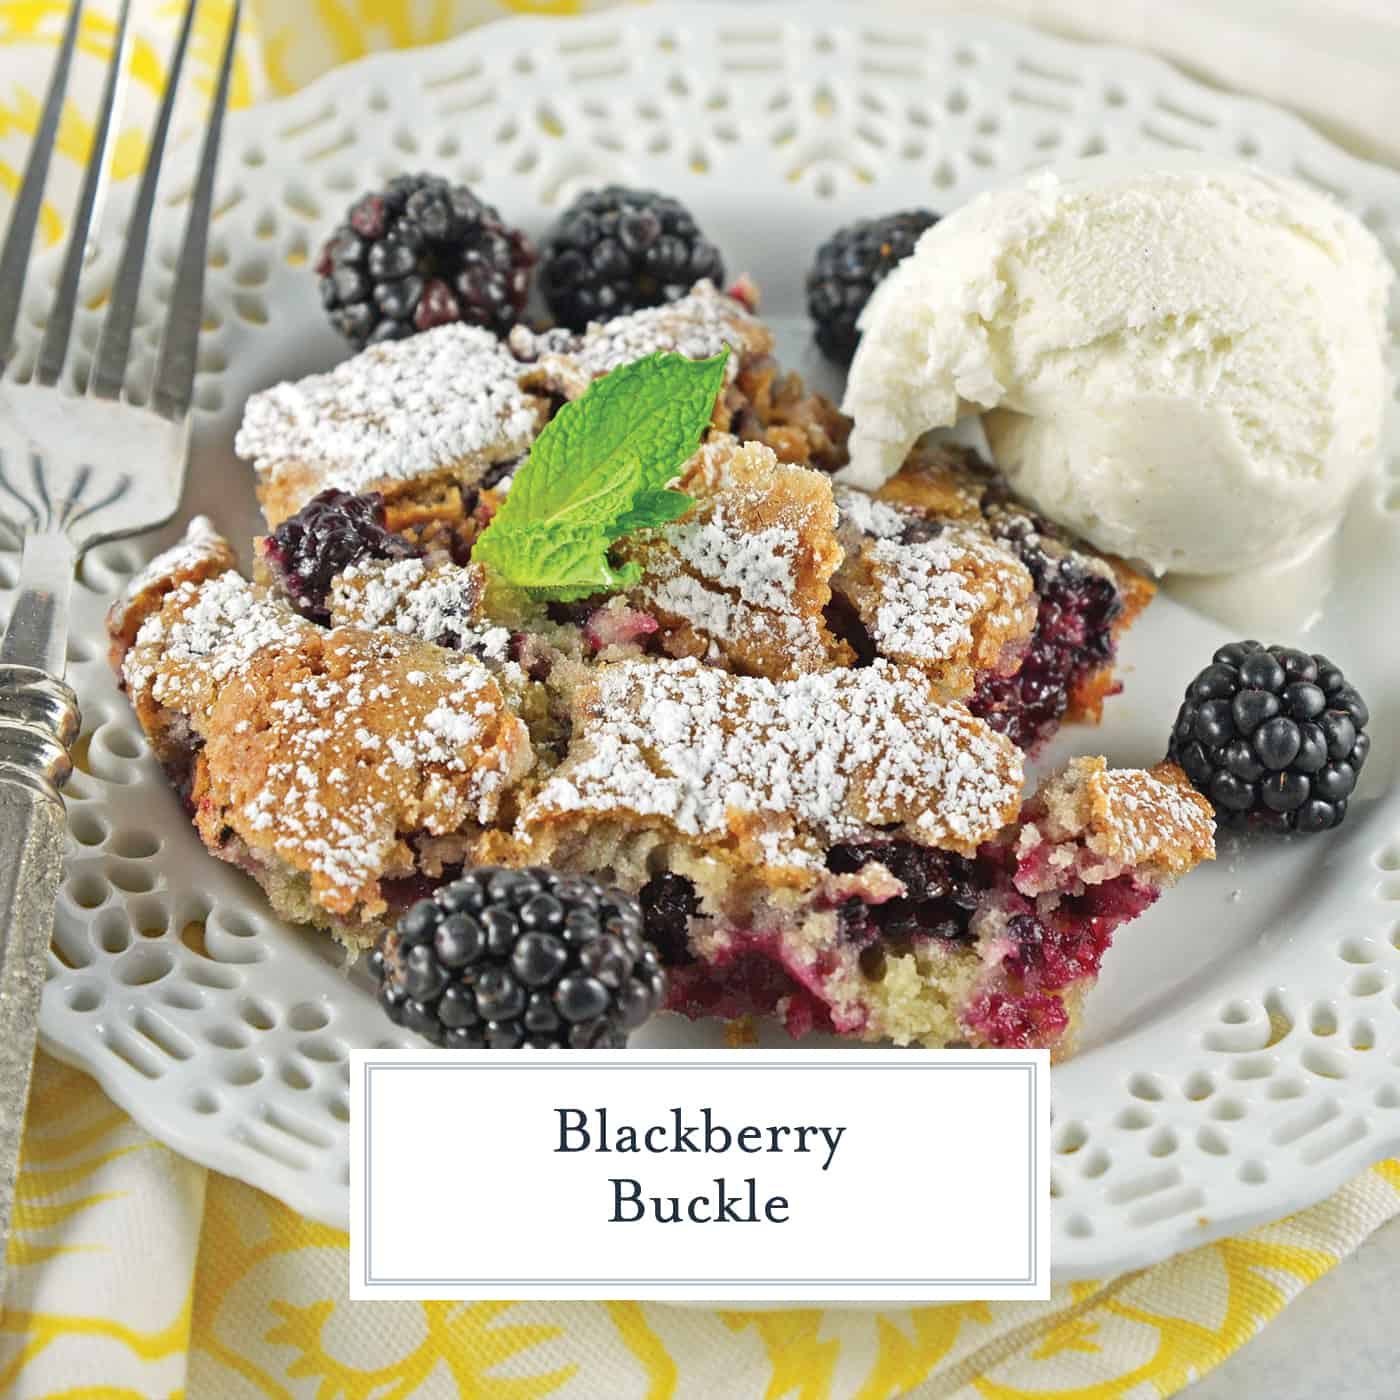 A Blackberry Buckle is the perfect way to kick off spring with your favorite berries. Perfect for breakfast, brunch and dessert! #blackberrybuckle #recipesthatuseblackberries www.savoryexperiments.com